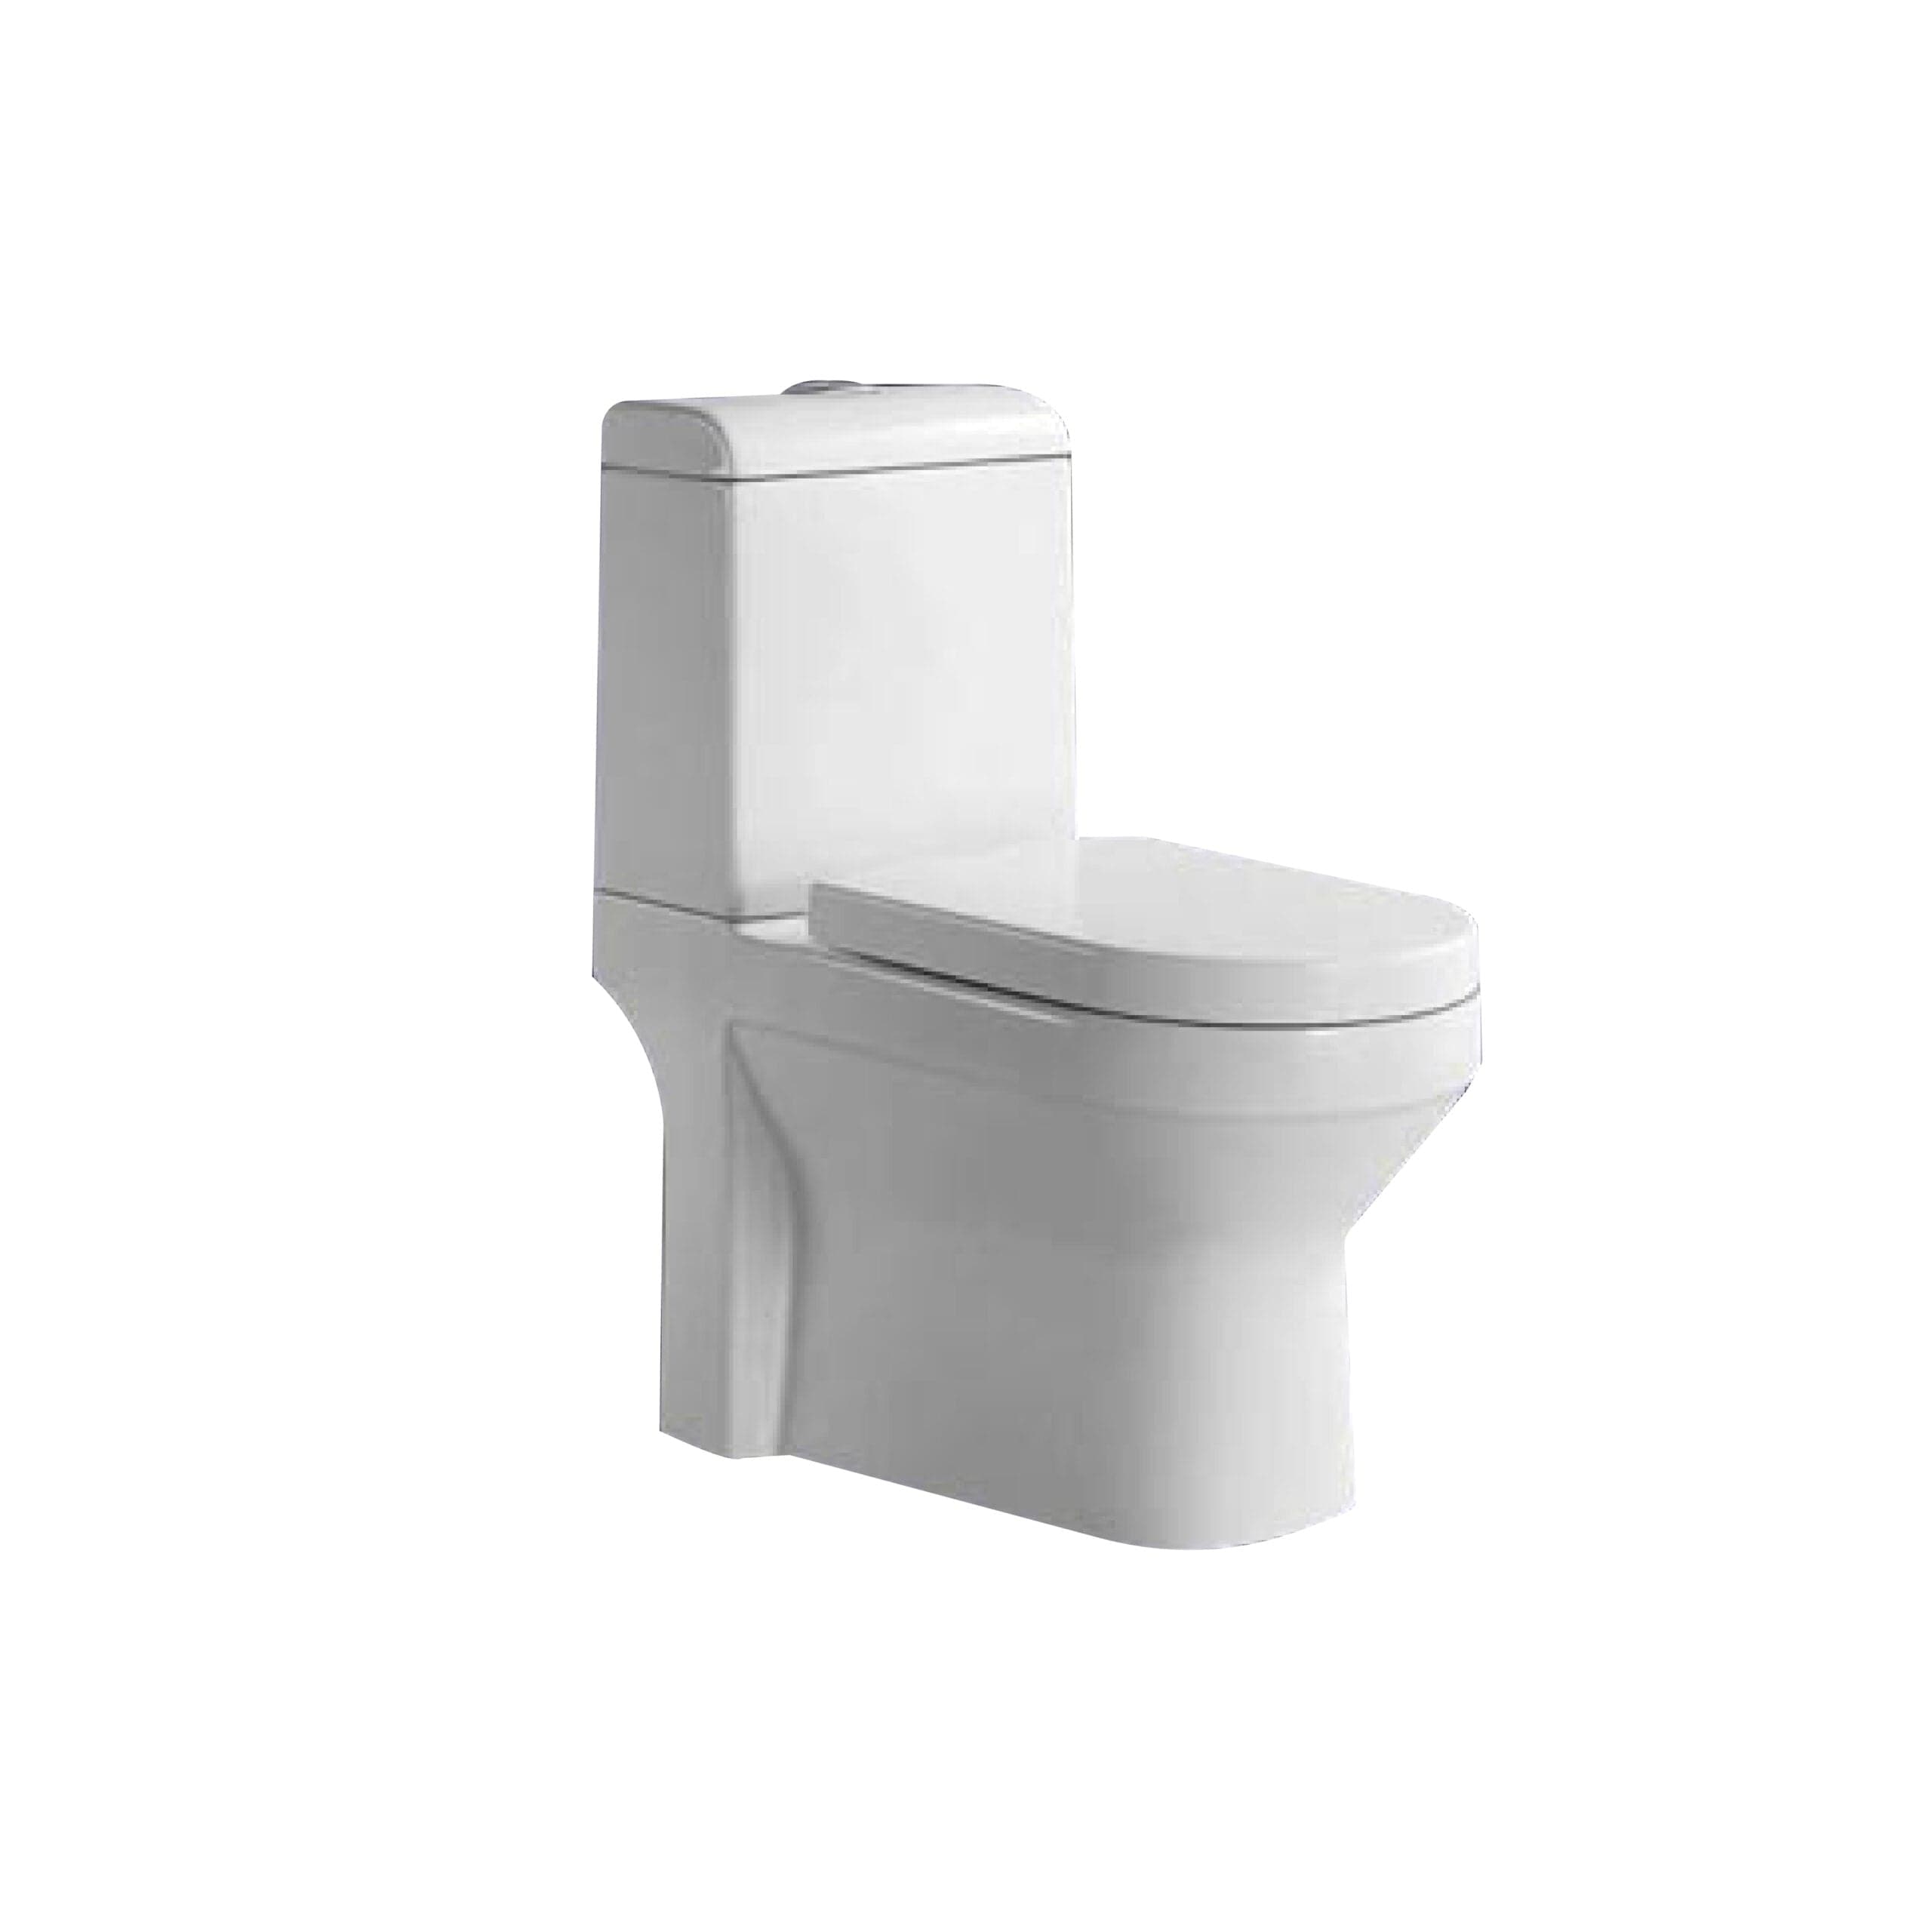 One-piece Washdown Water Closet S-Trap 630 x 340 x 705mm -AS503  | Supply Master | Accra, Ghana Toilet & Urinal Buy Tools hardware Building materials